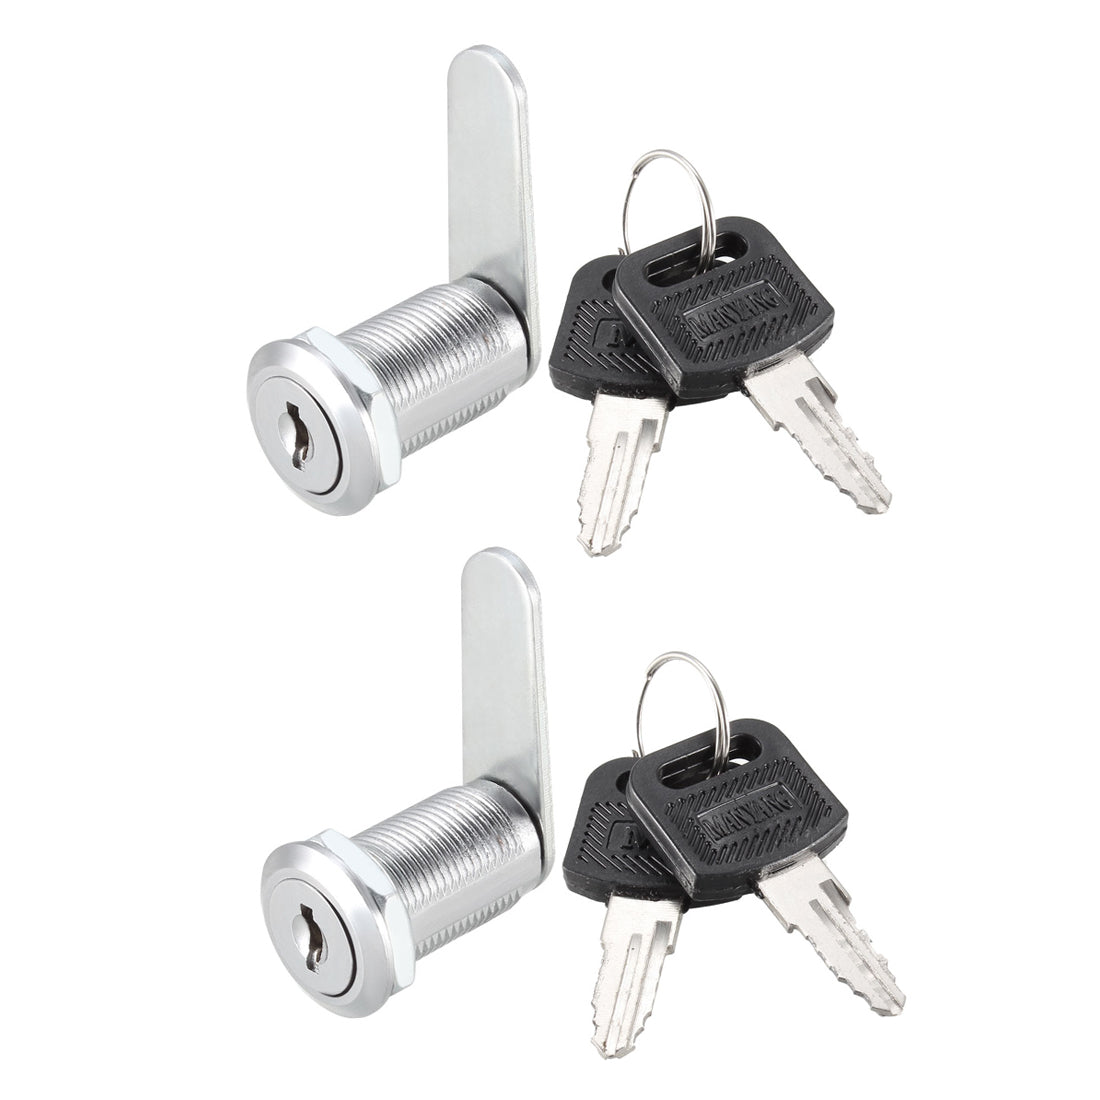 uxcell Uxcell Cam Lock 30mm Cylinder Length Fits Max 7/8-inch Panel Keyed Different 2Pcs